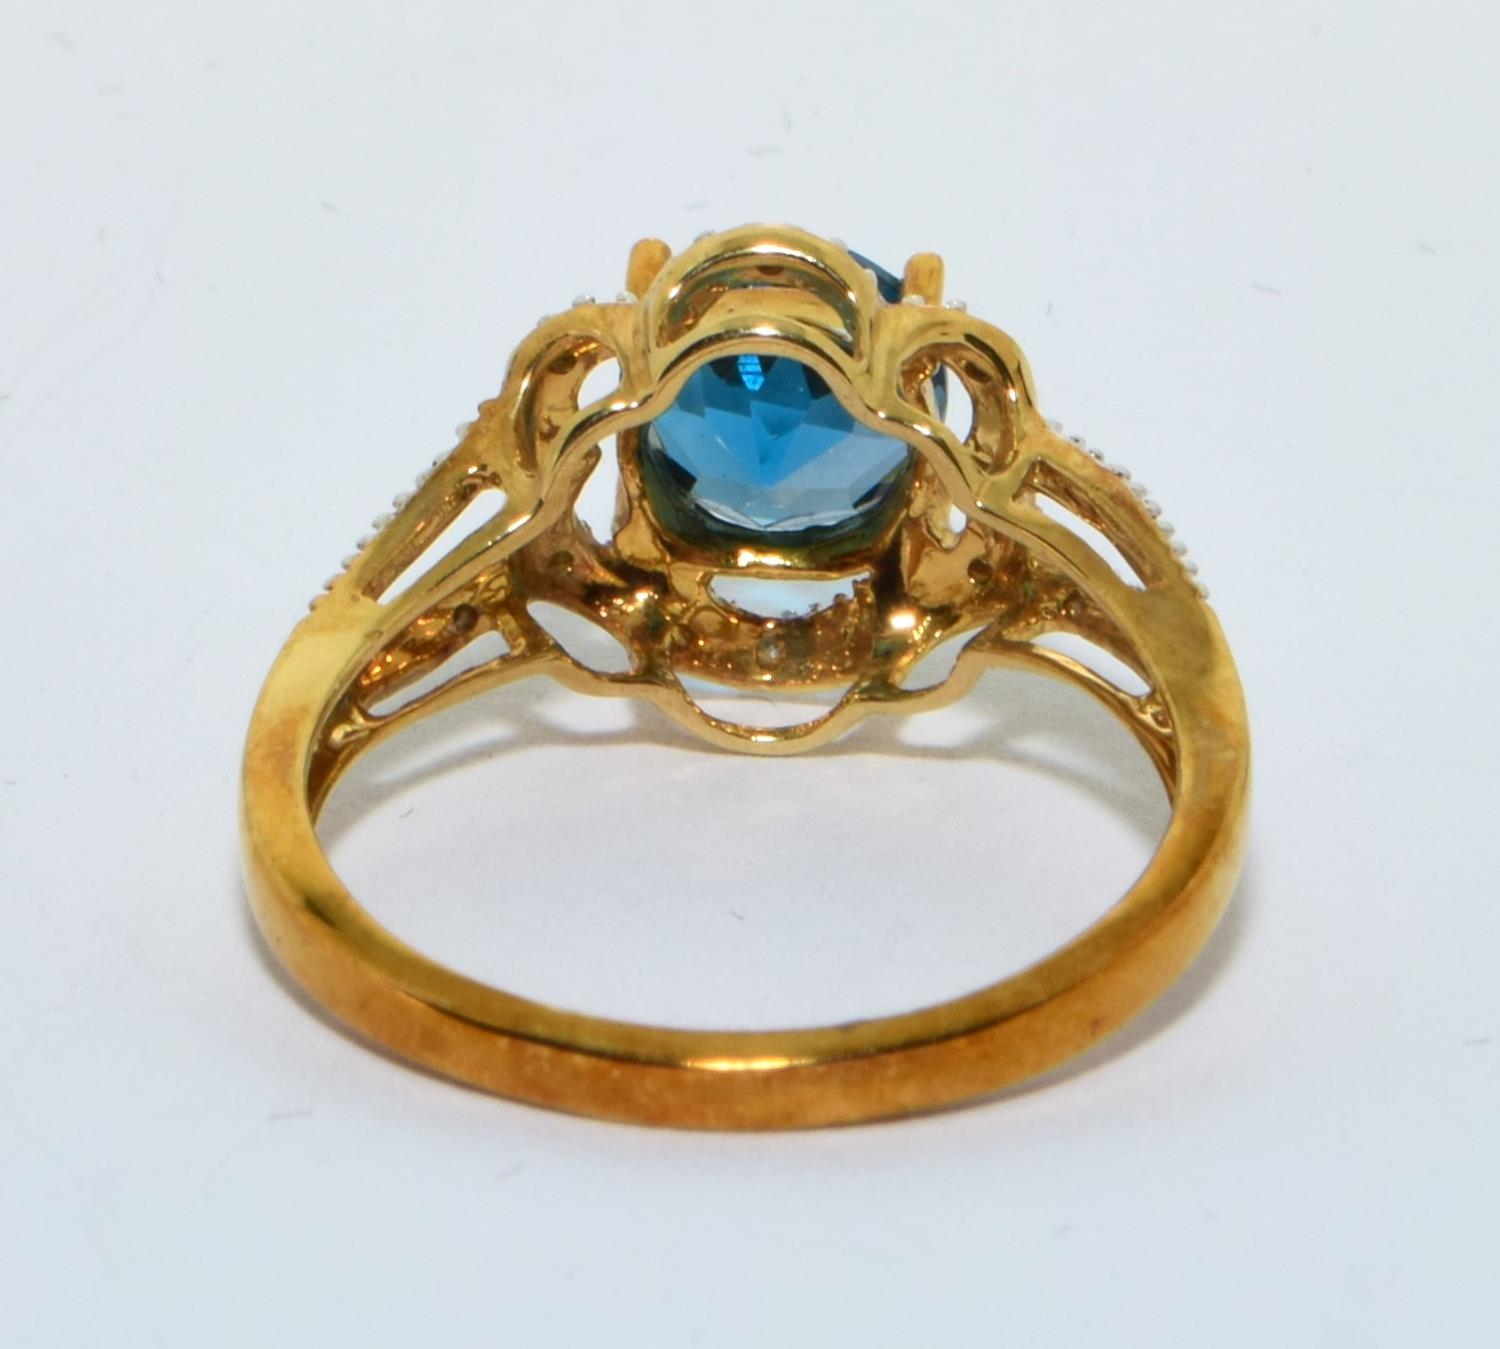 9ct gold Blue Topaz and Diamond halo design ring size N - Image 3 of 5